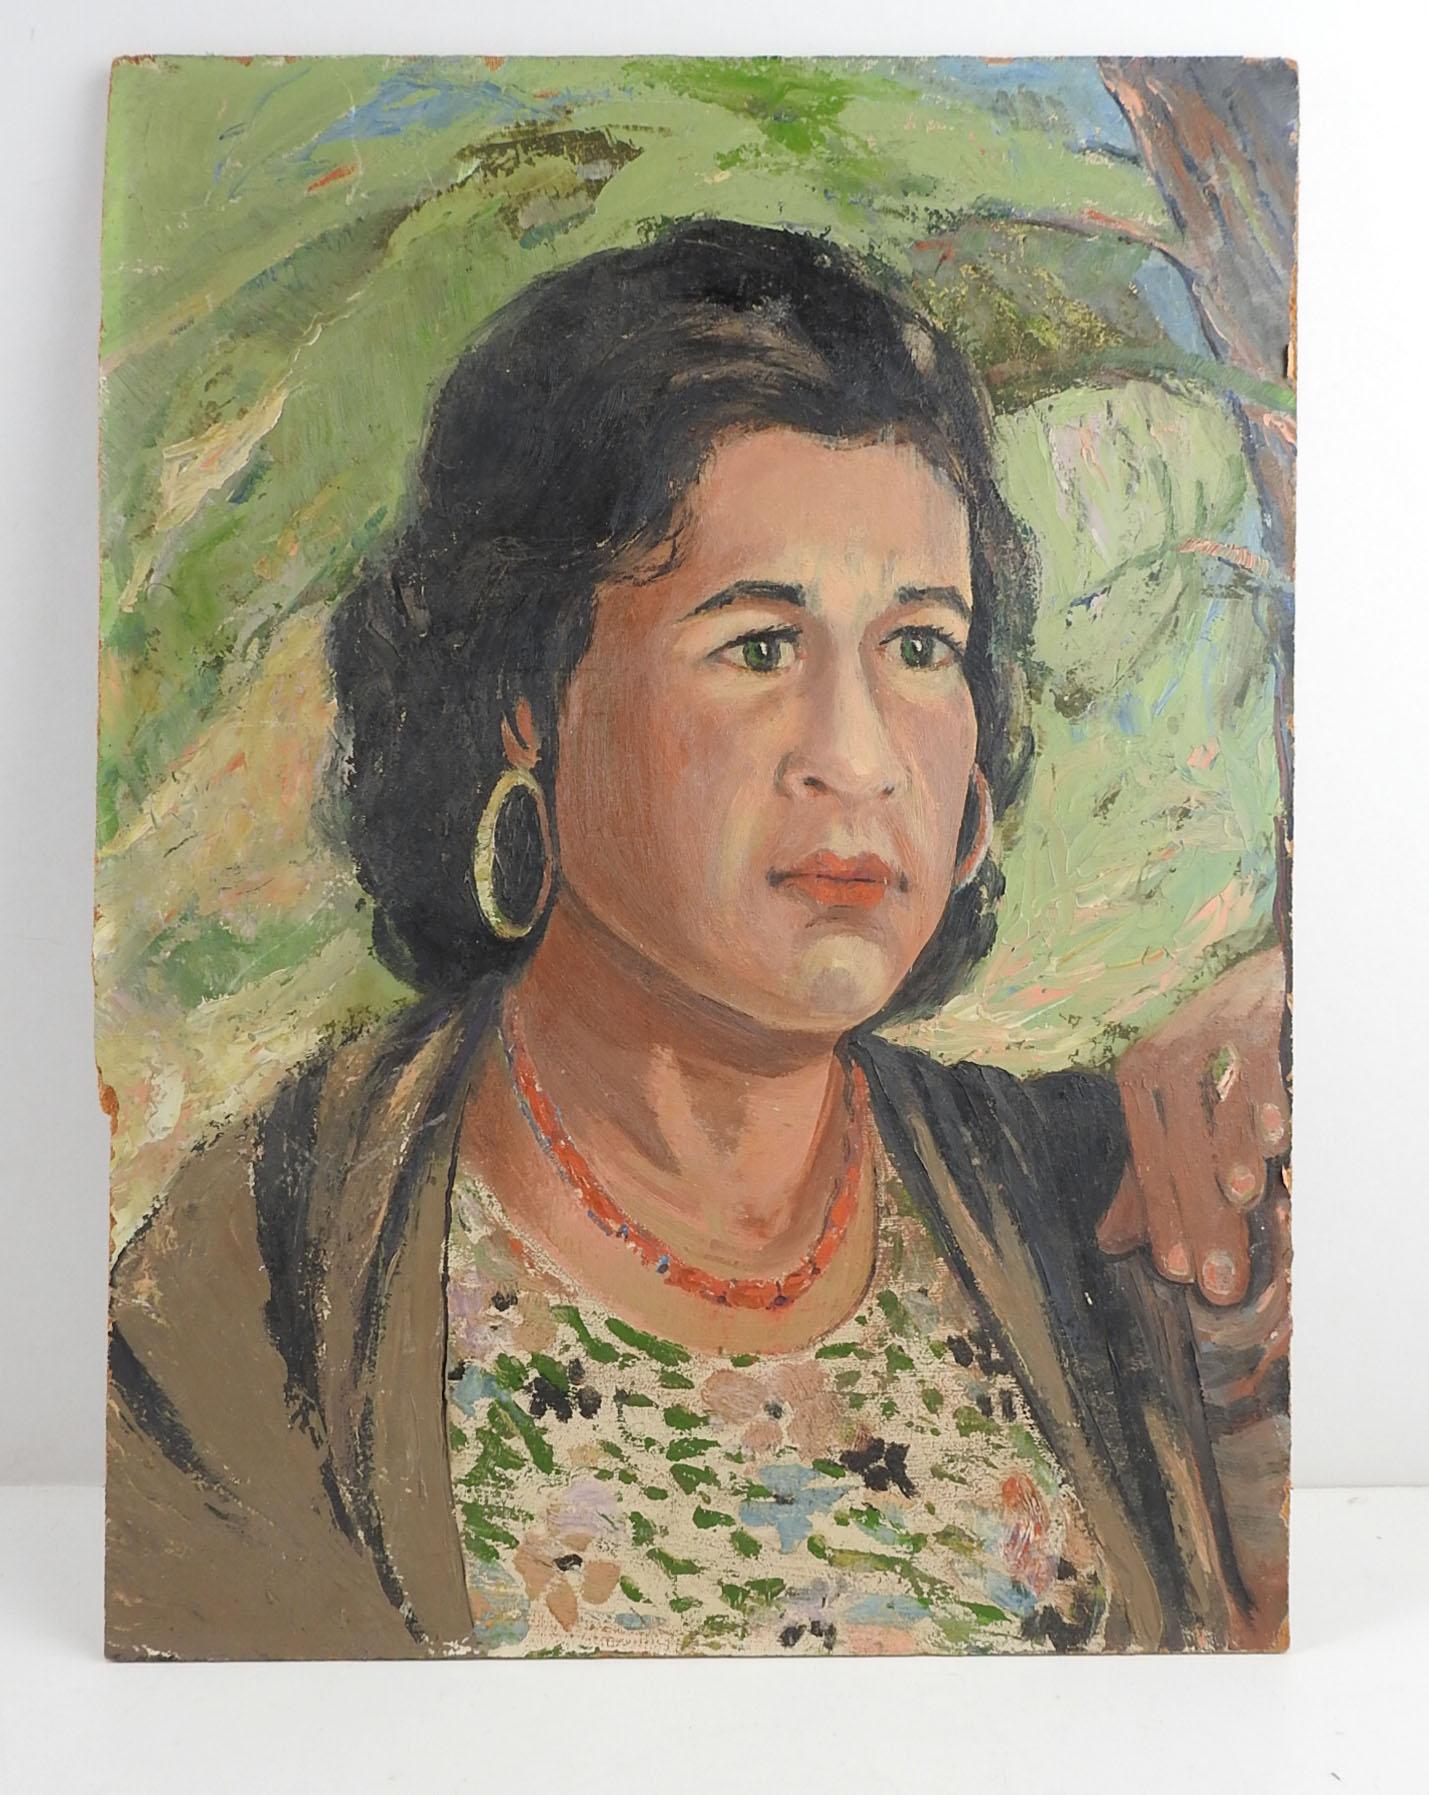 Vintage oil on masonite portrait painting of woman in green and pink floral dress, circa 1960's. Unsigned. Unframed, edge wear.